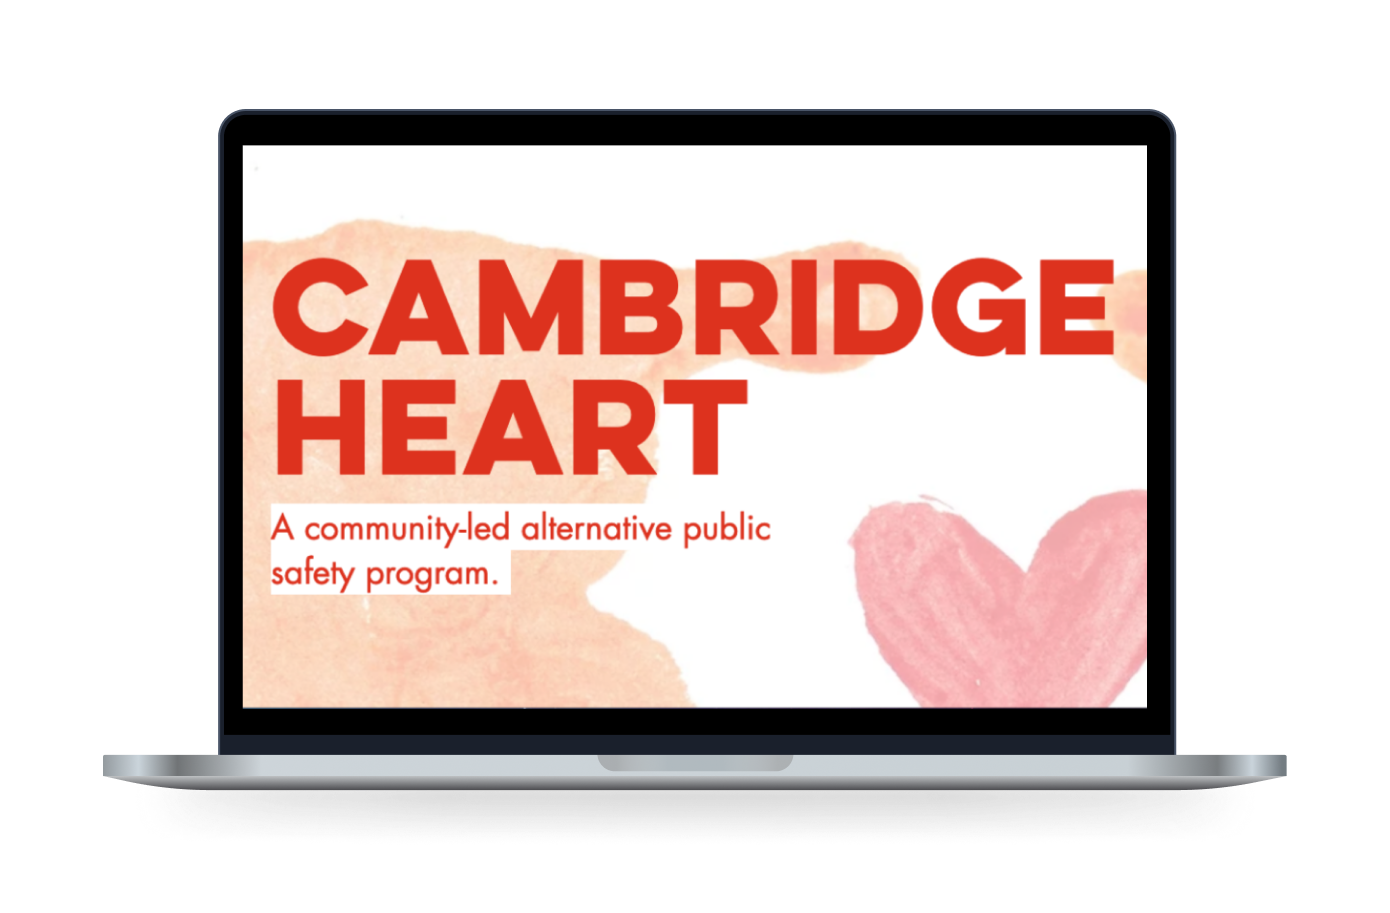 The Cambridge Heart logo displayed on a laptop